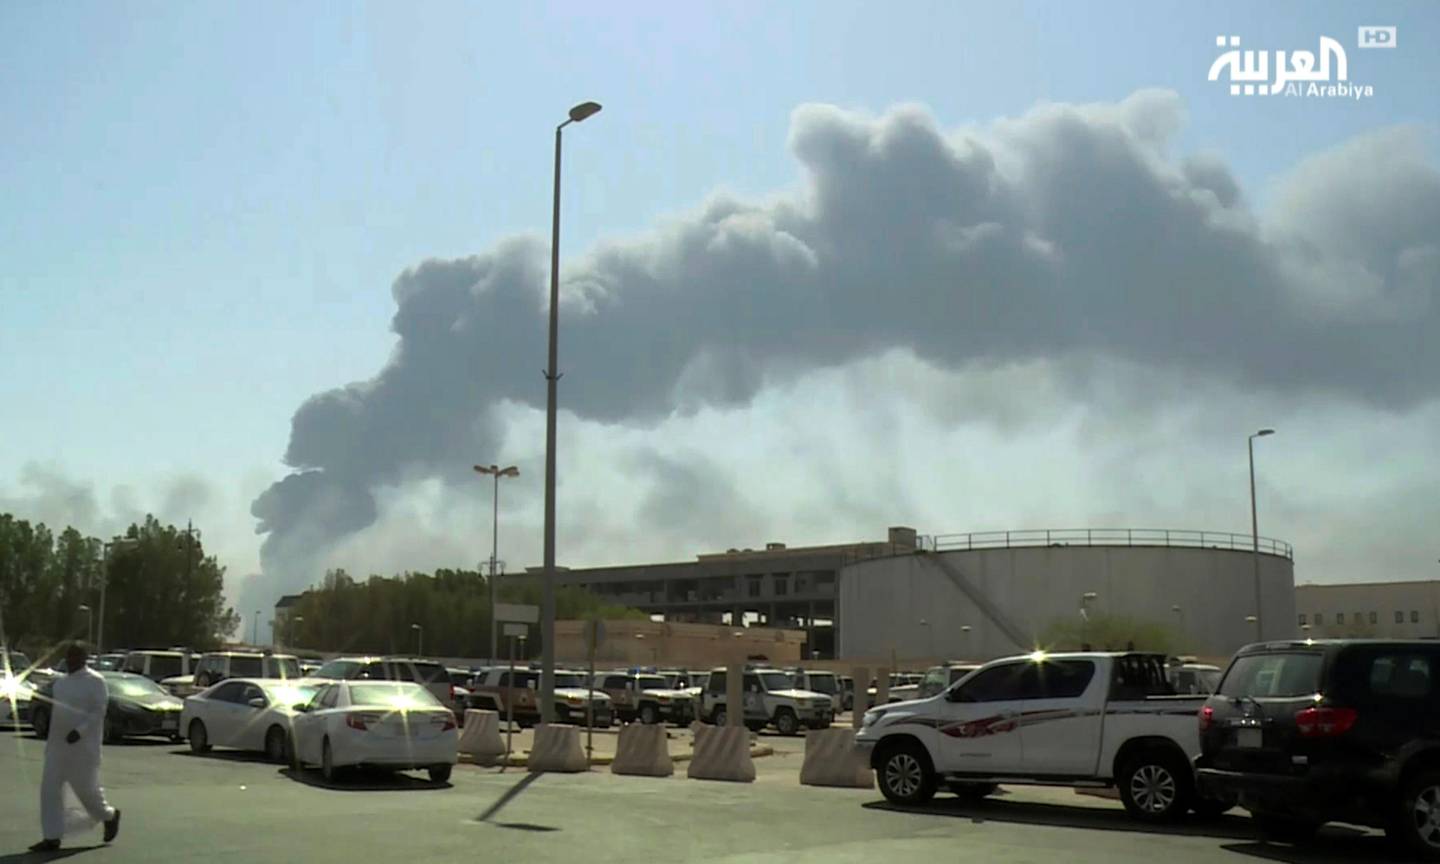 FILE - In this Saturday, Sept. 14, 2019 file photo, made from a video broadcast on the Saudi-owned Al-Arabiya satellite news channel, smoke from a fire at the Abqaiq oil processing facility fills the skyline, in Buqyaq, Saudi Arabia. The weekend drone attack on one of the worlds largest crude oil processing plants that dramatically cut into global oil supplies is the most visible sign yet of how Aramcos stability and security is directly linked to that of its owner -- the Saudi government and its ruling family. (Al-Arabiya via AP, File)